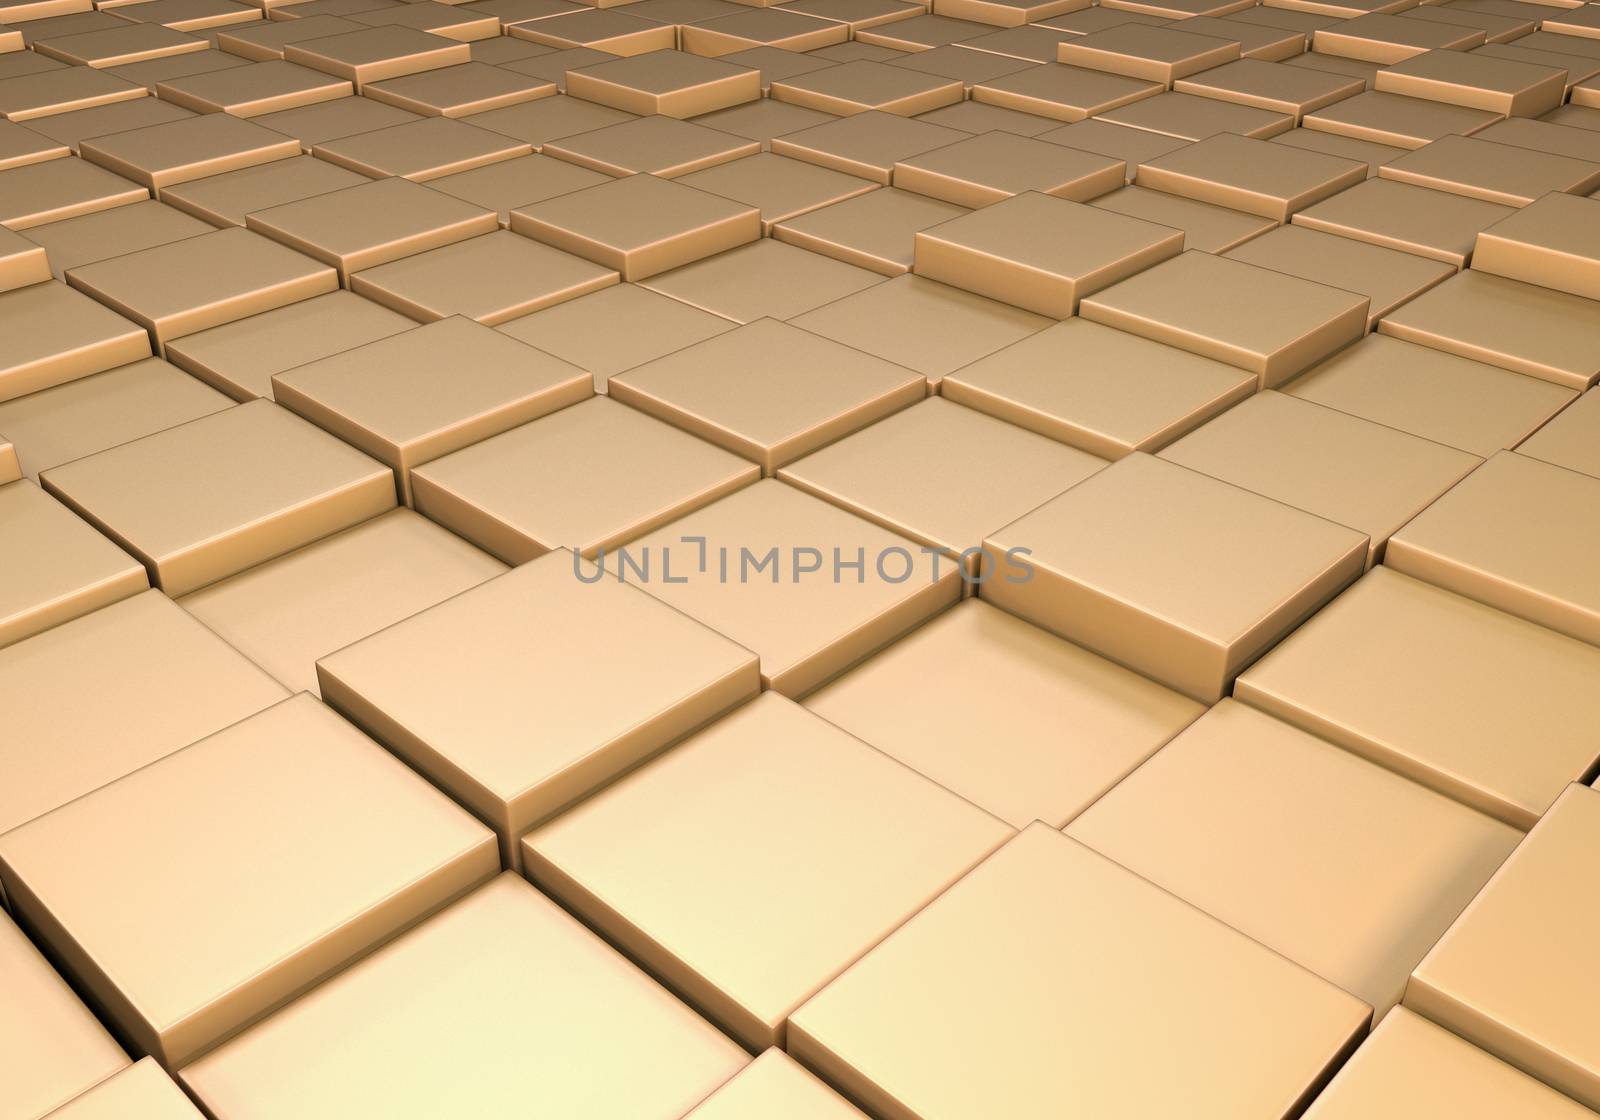 Field of reflective metallic gold tiles at different heights